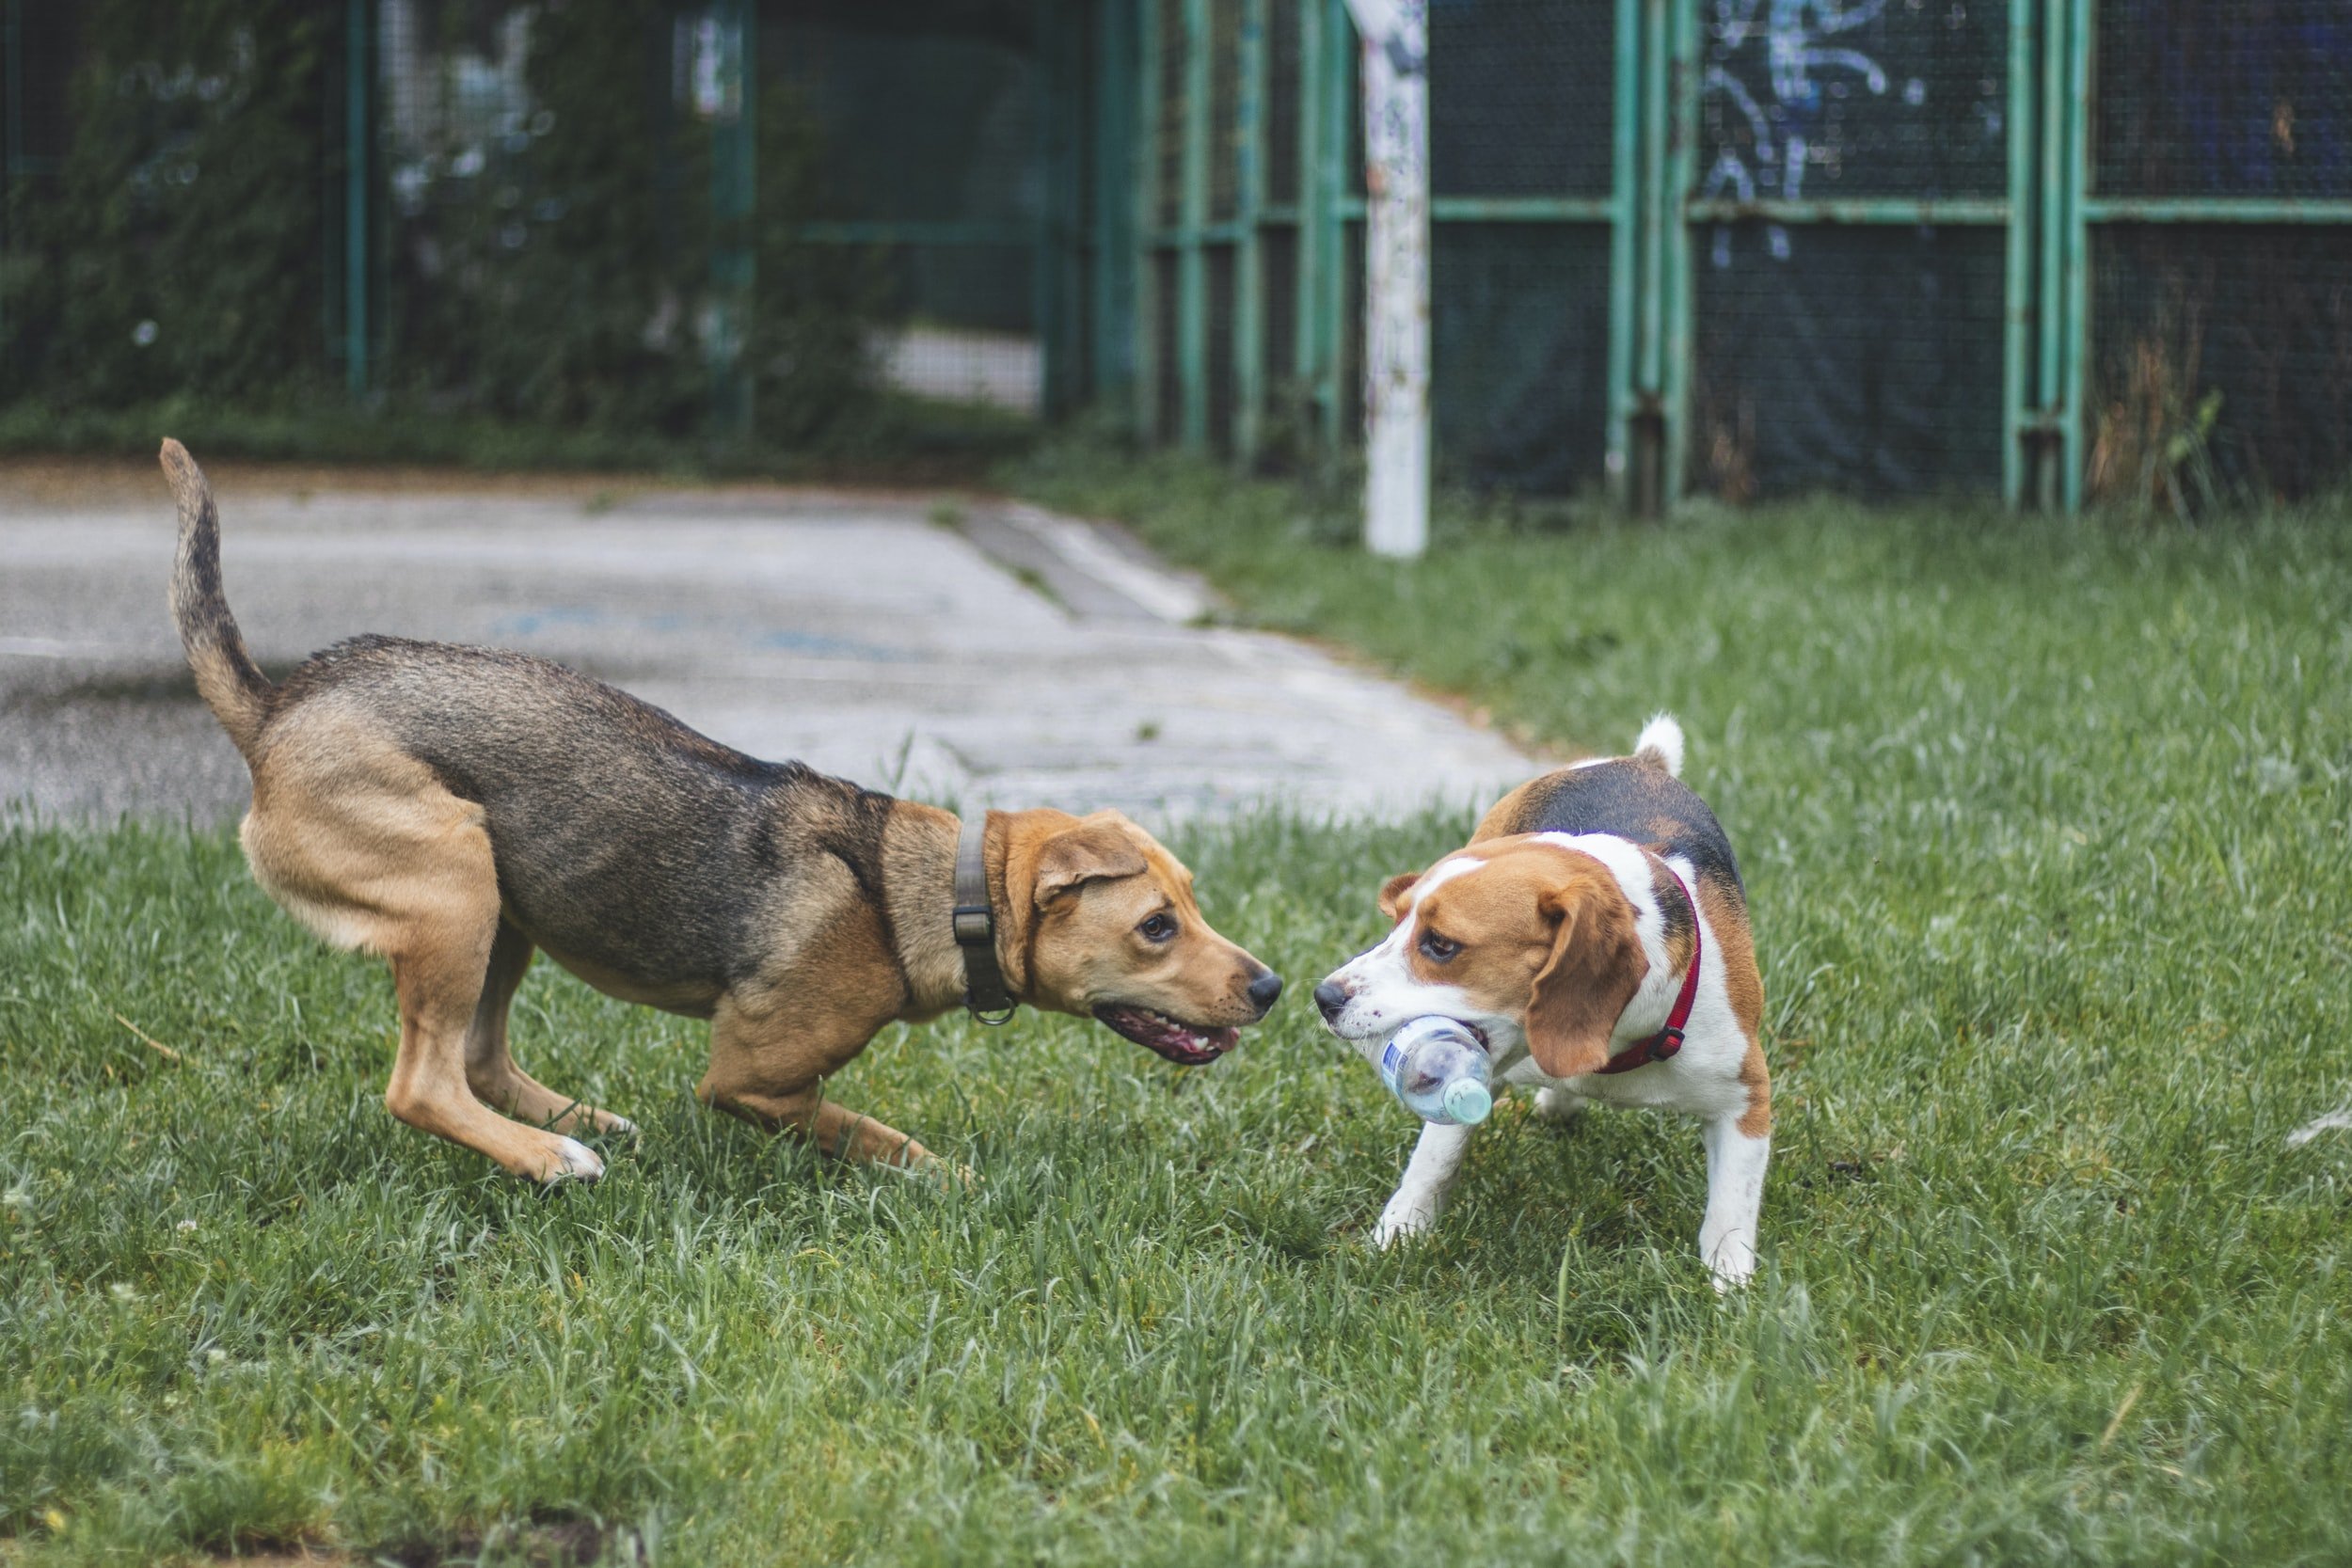 Is My Dog Playing or Fighting? Here’s How to Tell the Difference